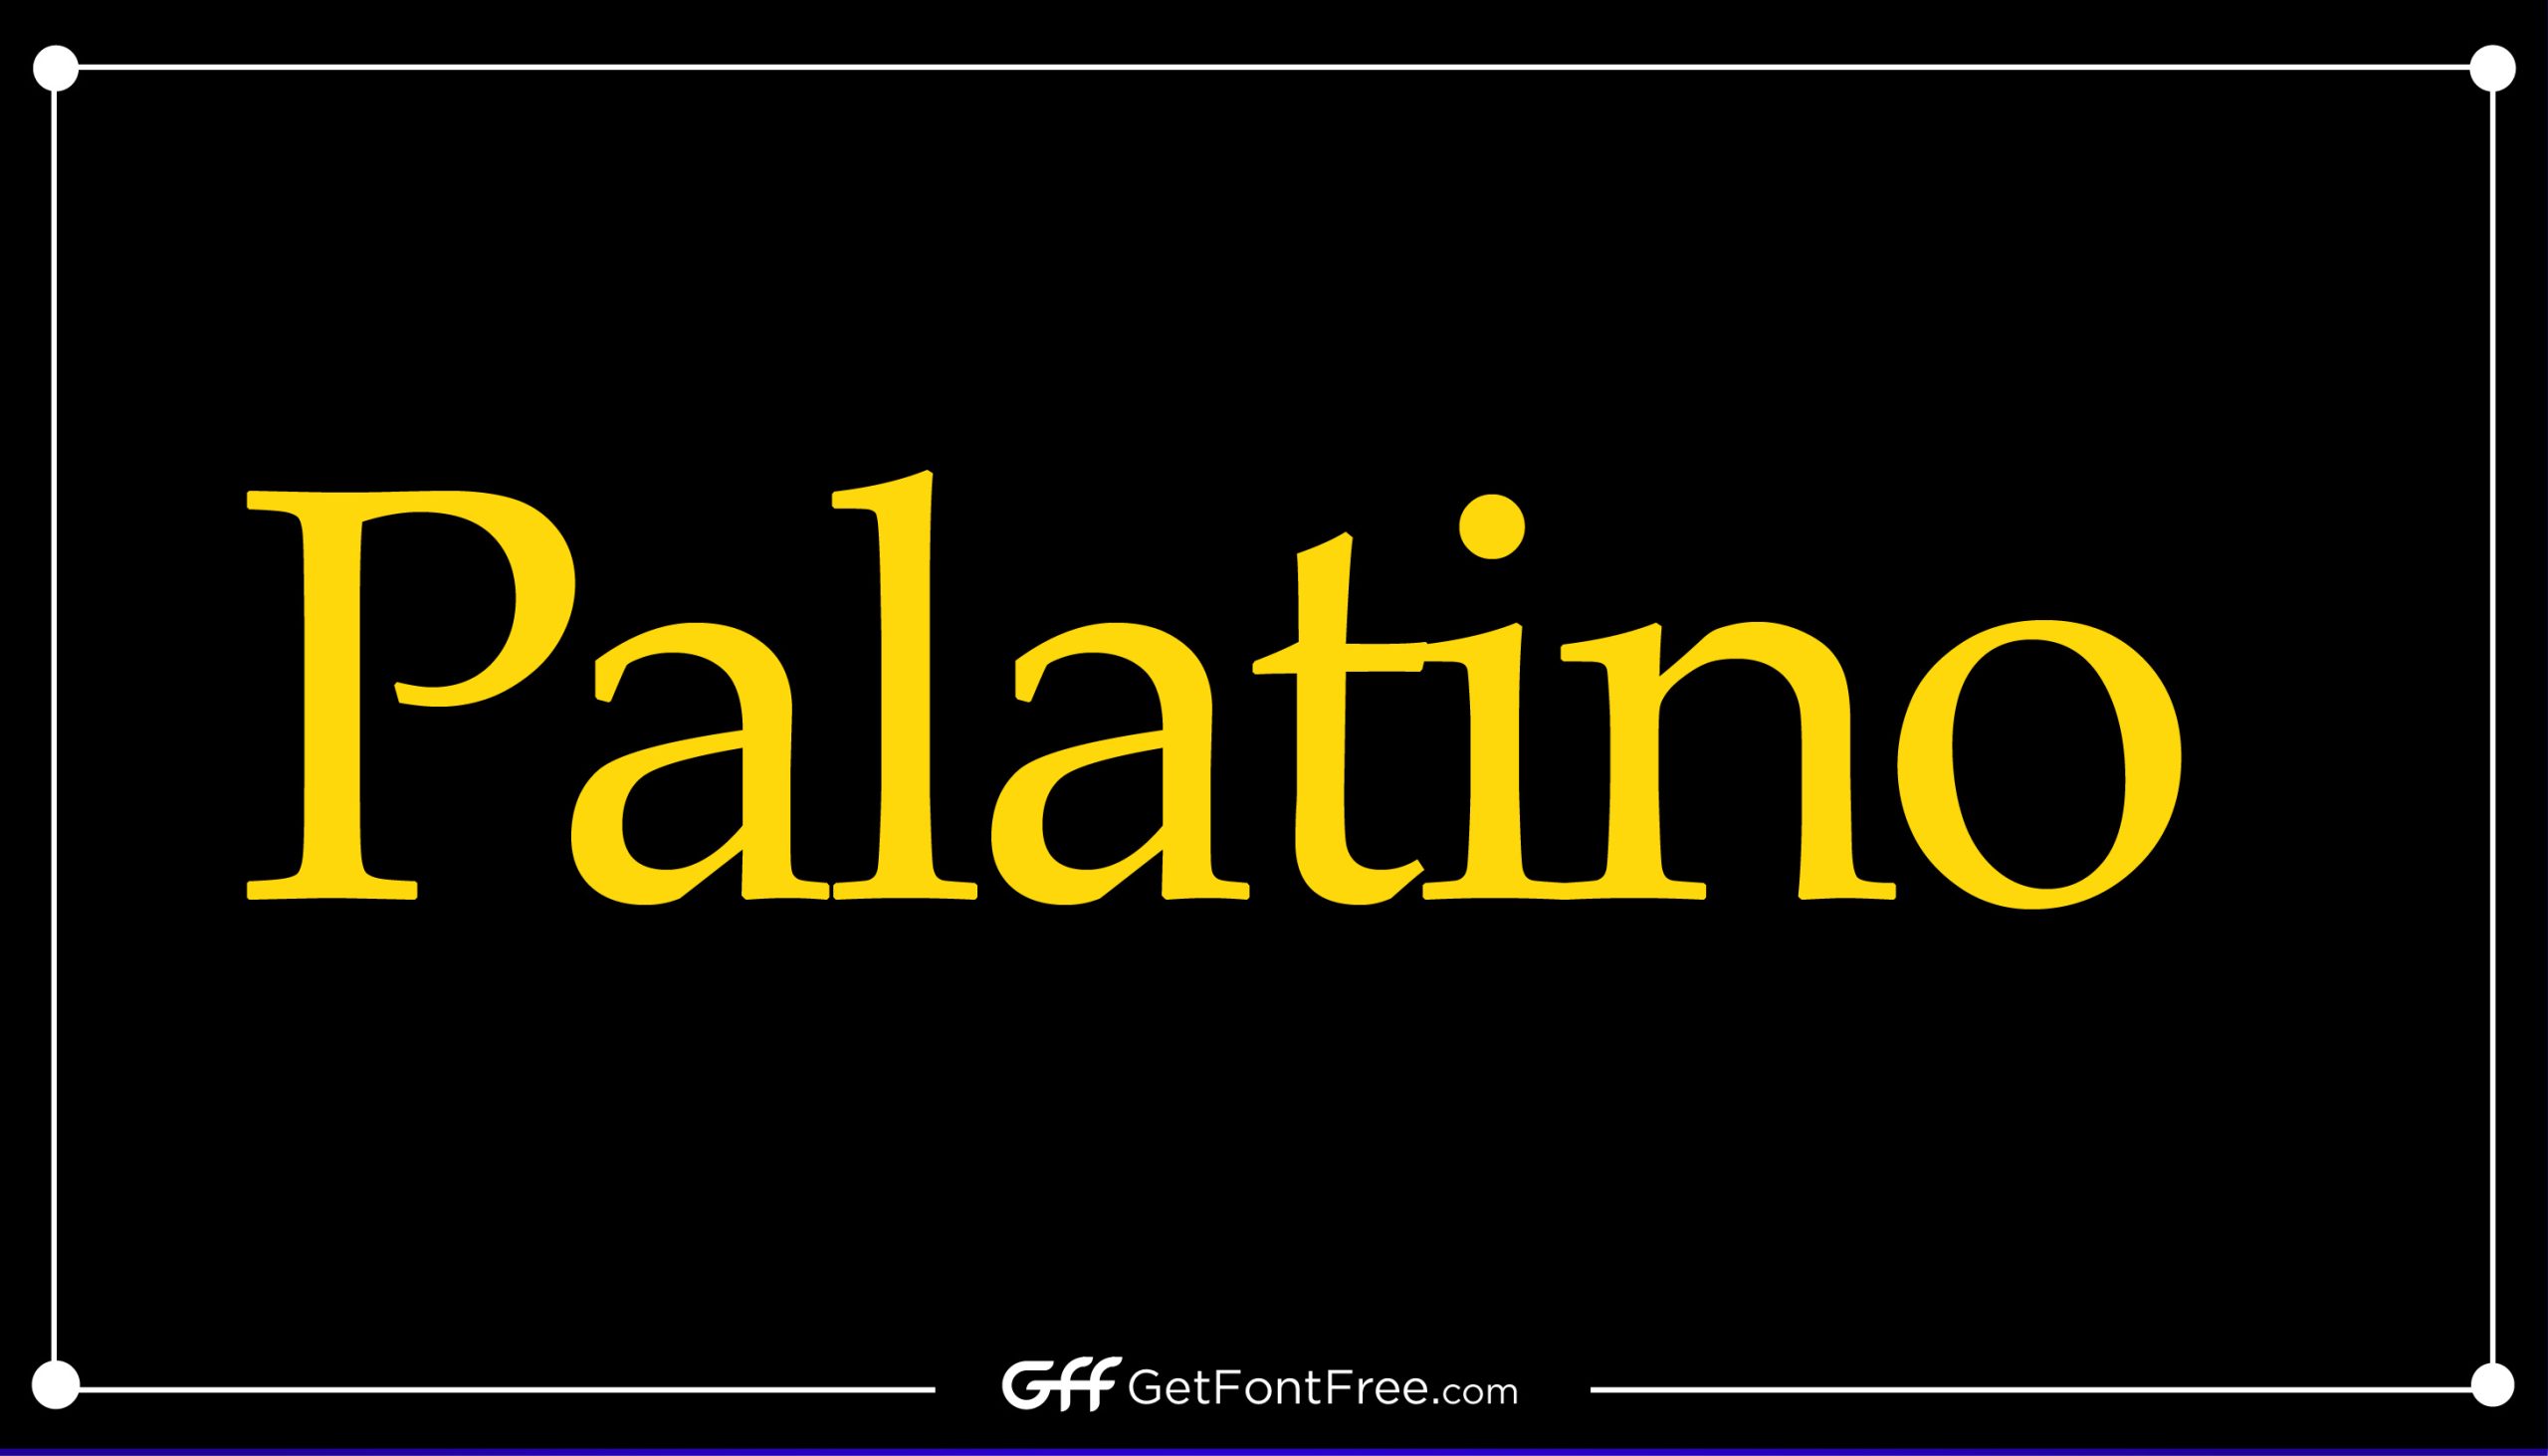 Palatino Linotype Font is a typeface that belongs to the serif category of fonts. Hermann Zapf designed it in 1949 for the Stempel foundry in Frankfurt, Germany. Palatino Linotype is a digital typeface and is based on the original Palatino font, which was designed by Zapf in the 1940s for metal-type printing. Palatino Linotype is one of the most widely used serif fonts in the world today and is known for its classic and elegant appearance.